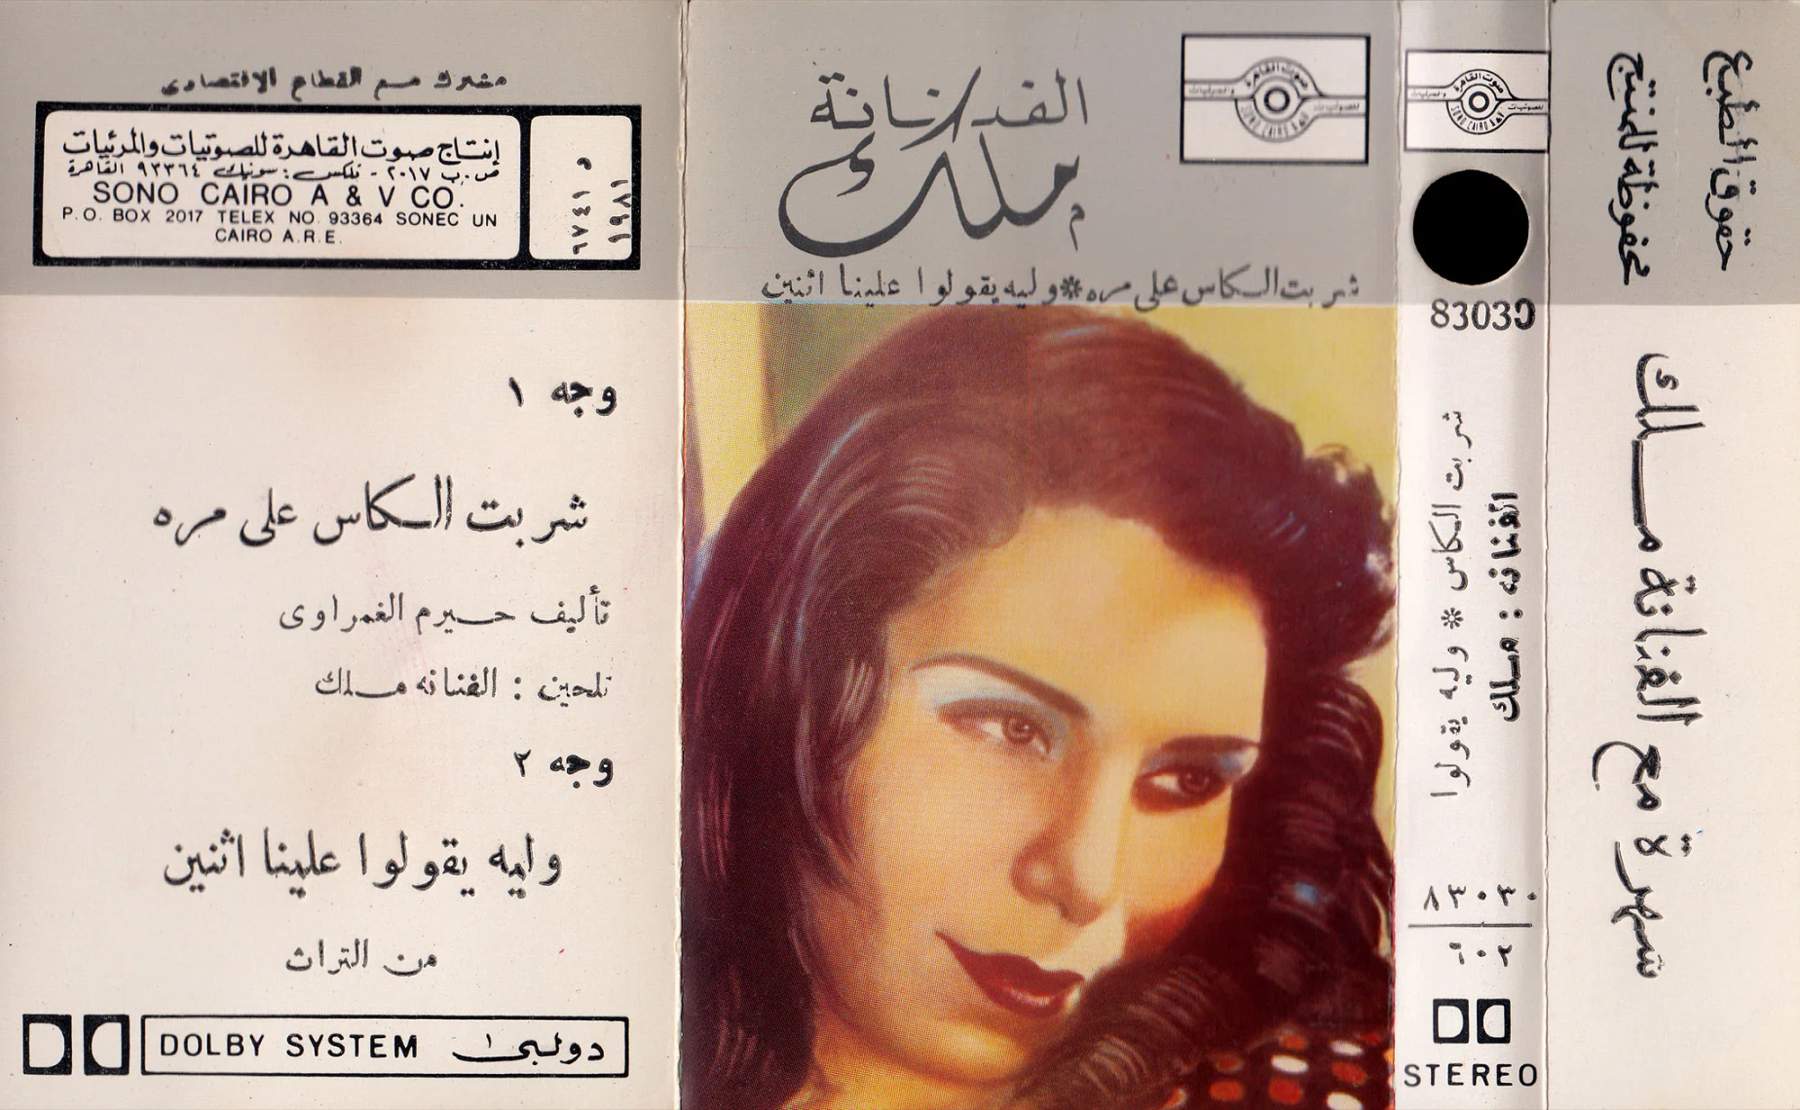 amr-hamid-egyptian-cassette-archive-graphic-design-itsnicethat-09.jpg